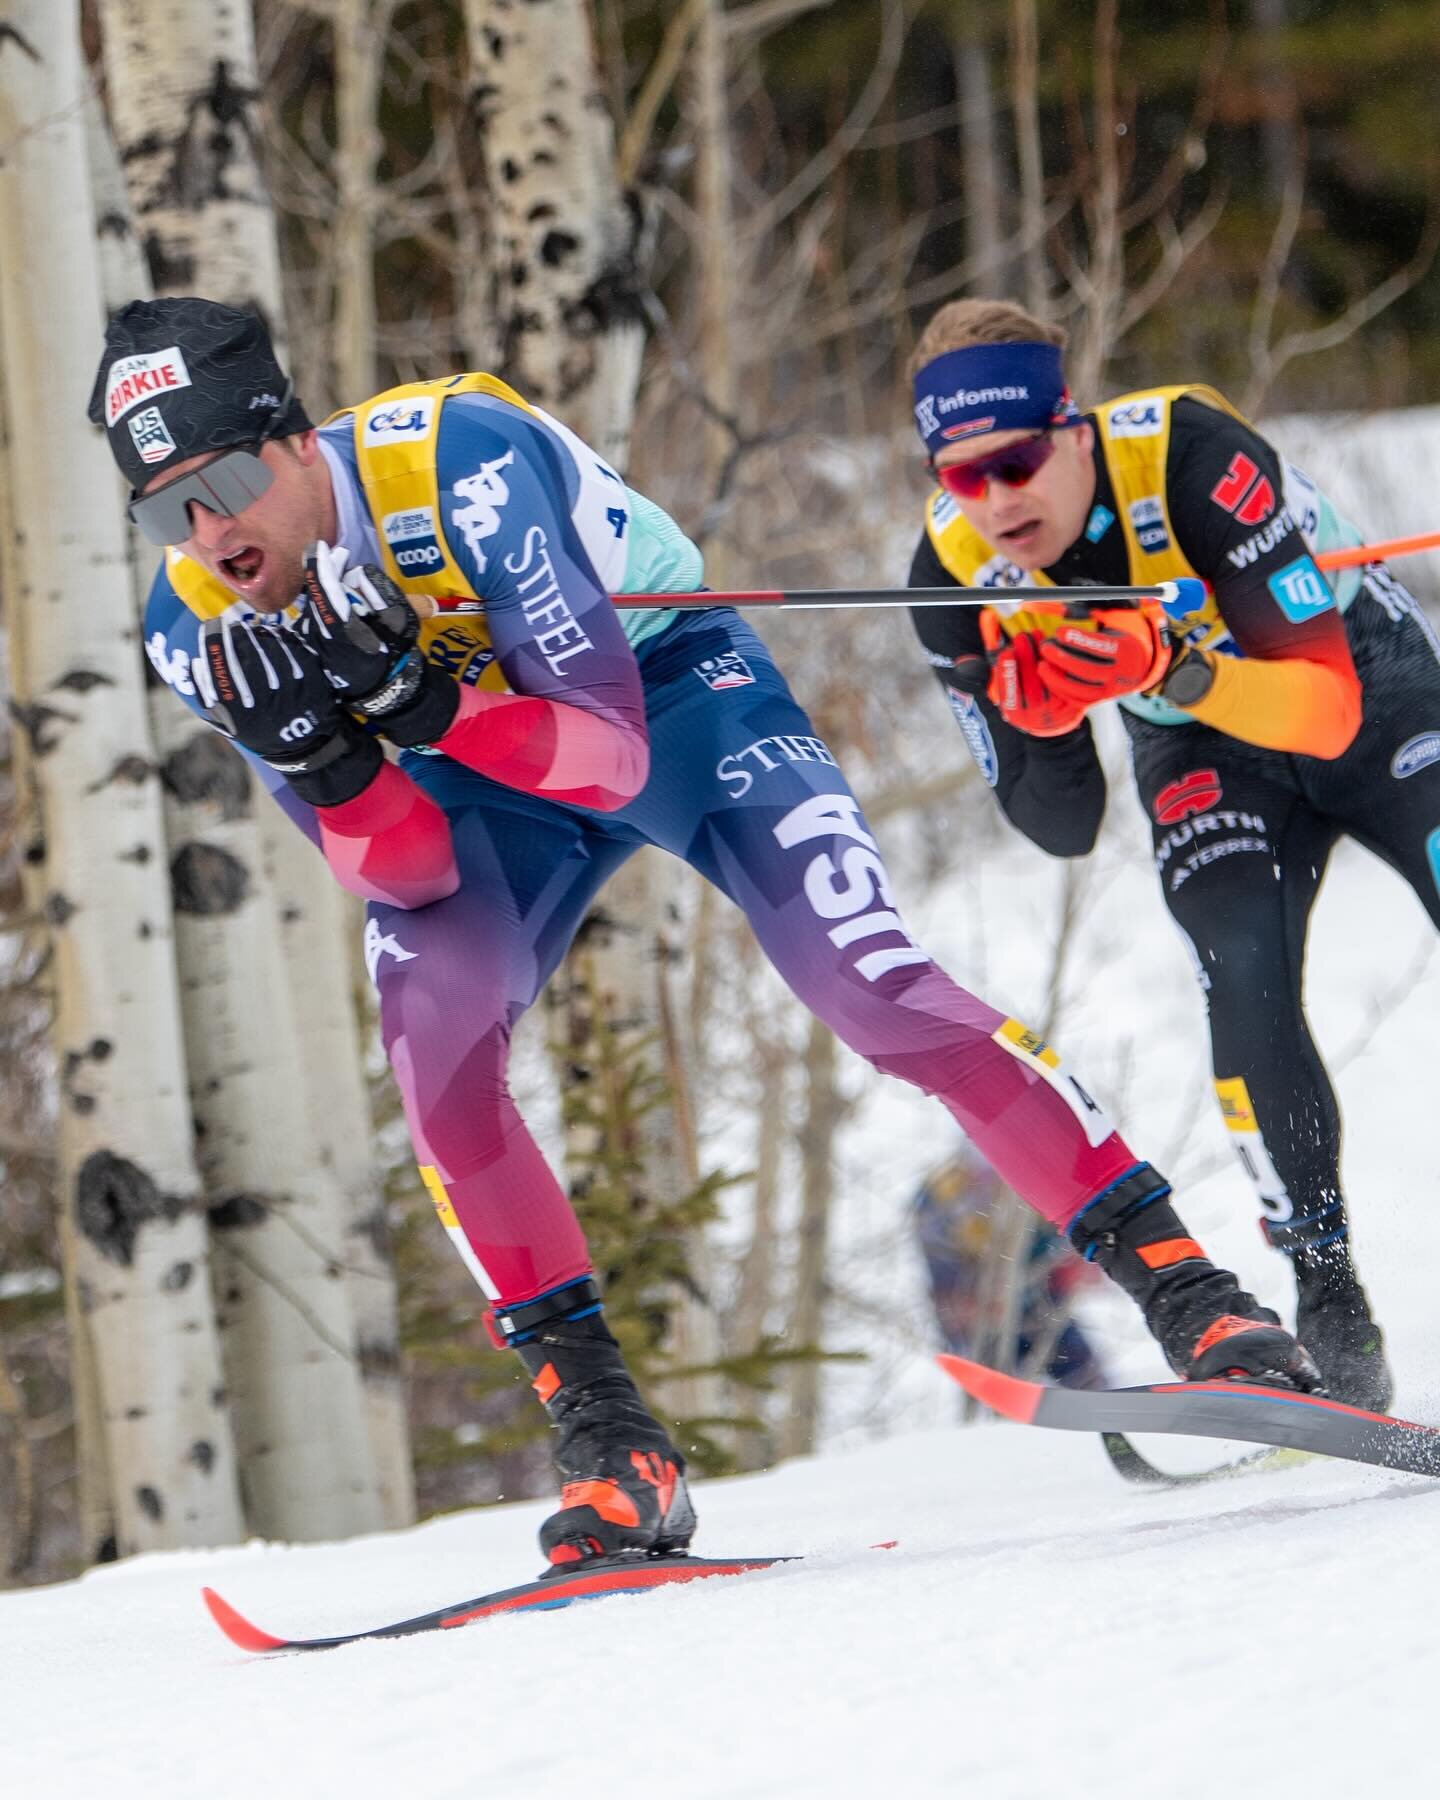 Raced my first World Cup here in 2012 as a MSU Bobcat! This time with @teambirkie 

Cool to meet a bunch of new rippin Americans and reconnect with friends I now rarely see. Thanks to everyone who came to cheer and all those who have made ski racing 